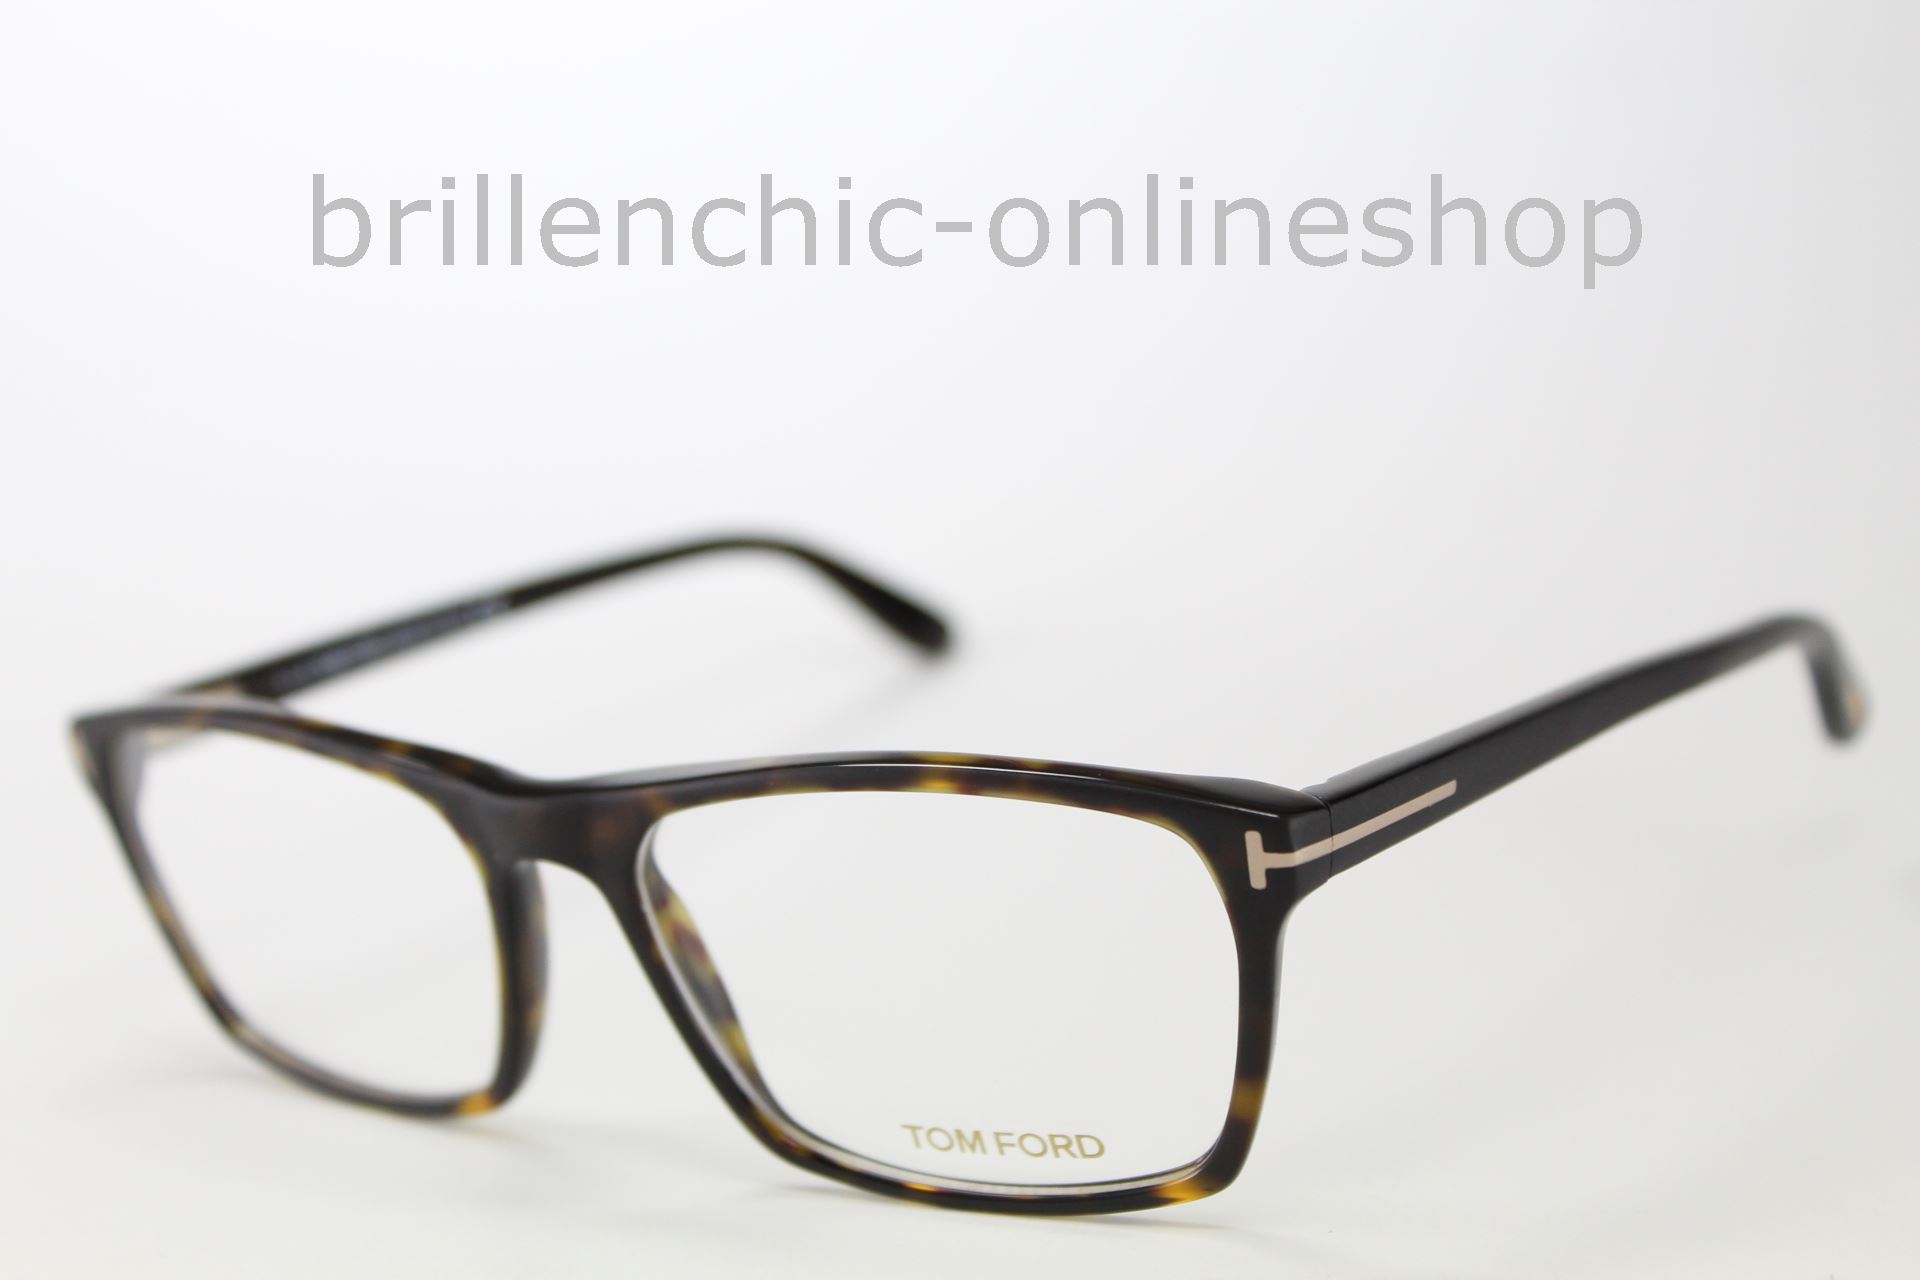 Brillenchic-onlineshop in Berlin - TOM FORD TF 5295 052 